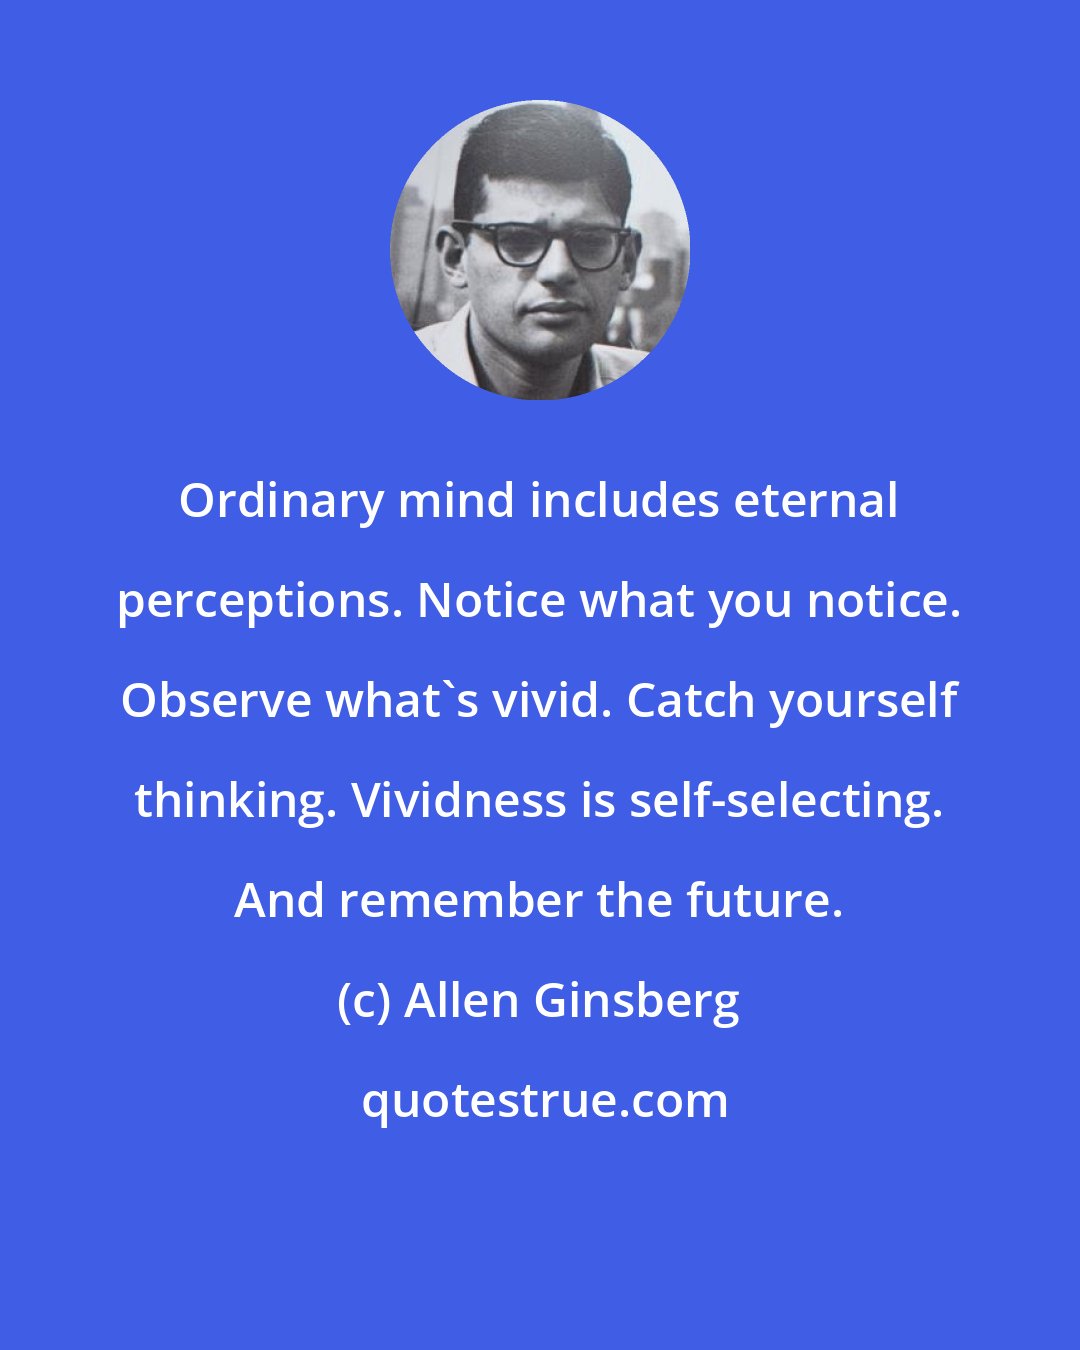 Allen Ginsberg: Ordinary mind includes eternal perceptions. Notice what you notice. Observe what's vivid. Catch yourself thinking. Vividness is self-selecting. And remember the future.